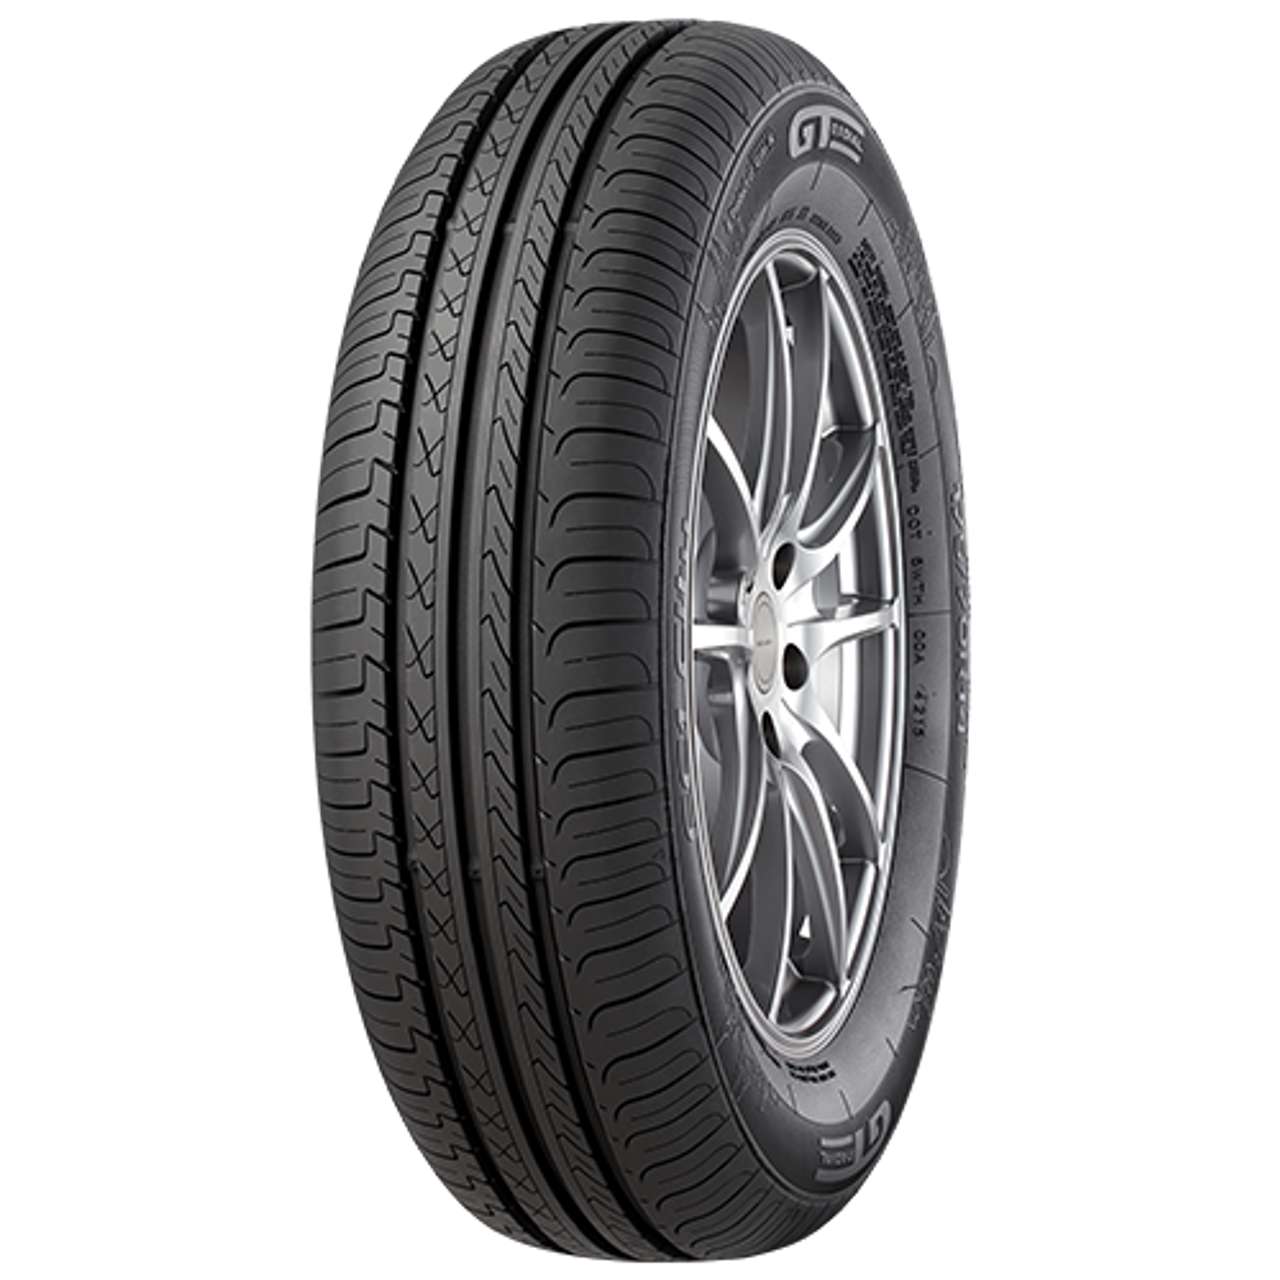 GT-RADIAL FE1 CITY 165/65R14 83T BSW